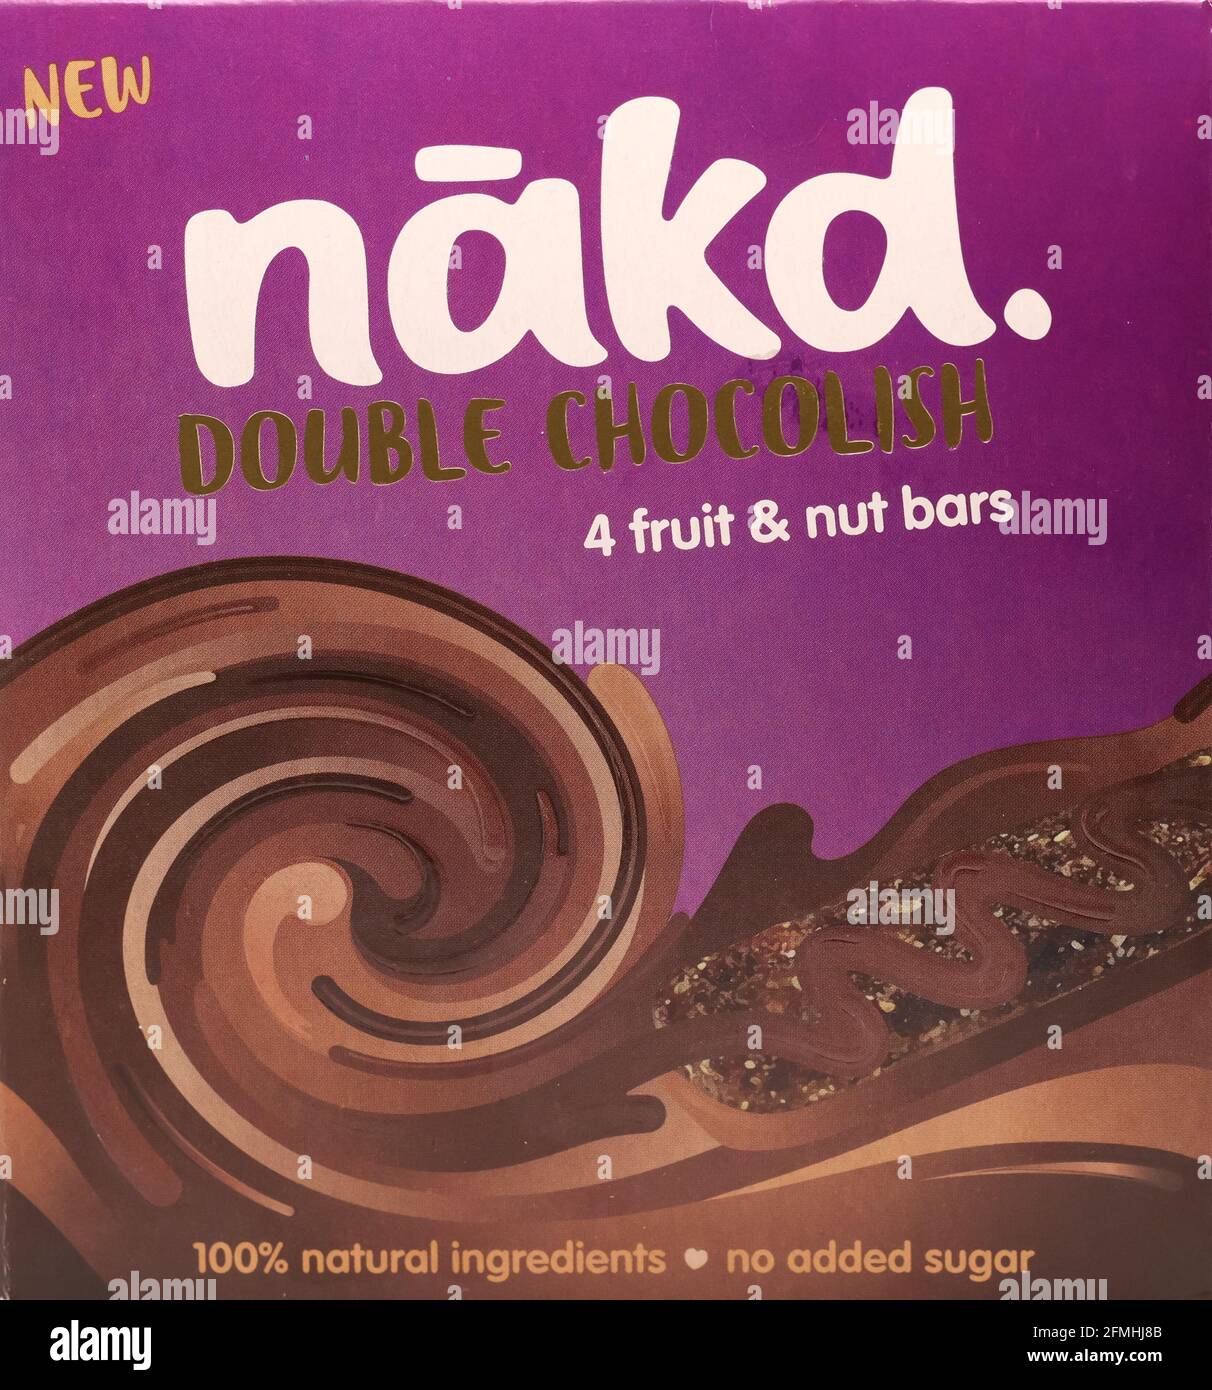 CHESTER, UNITED KINGDOM - 2nd May 2021: A vegan-friendly Nakd Double Chocolish packet of wholefood bars, which is commonly found in the UK Stock Photo